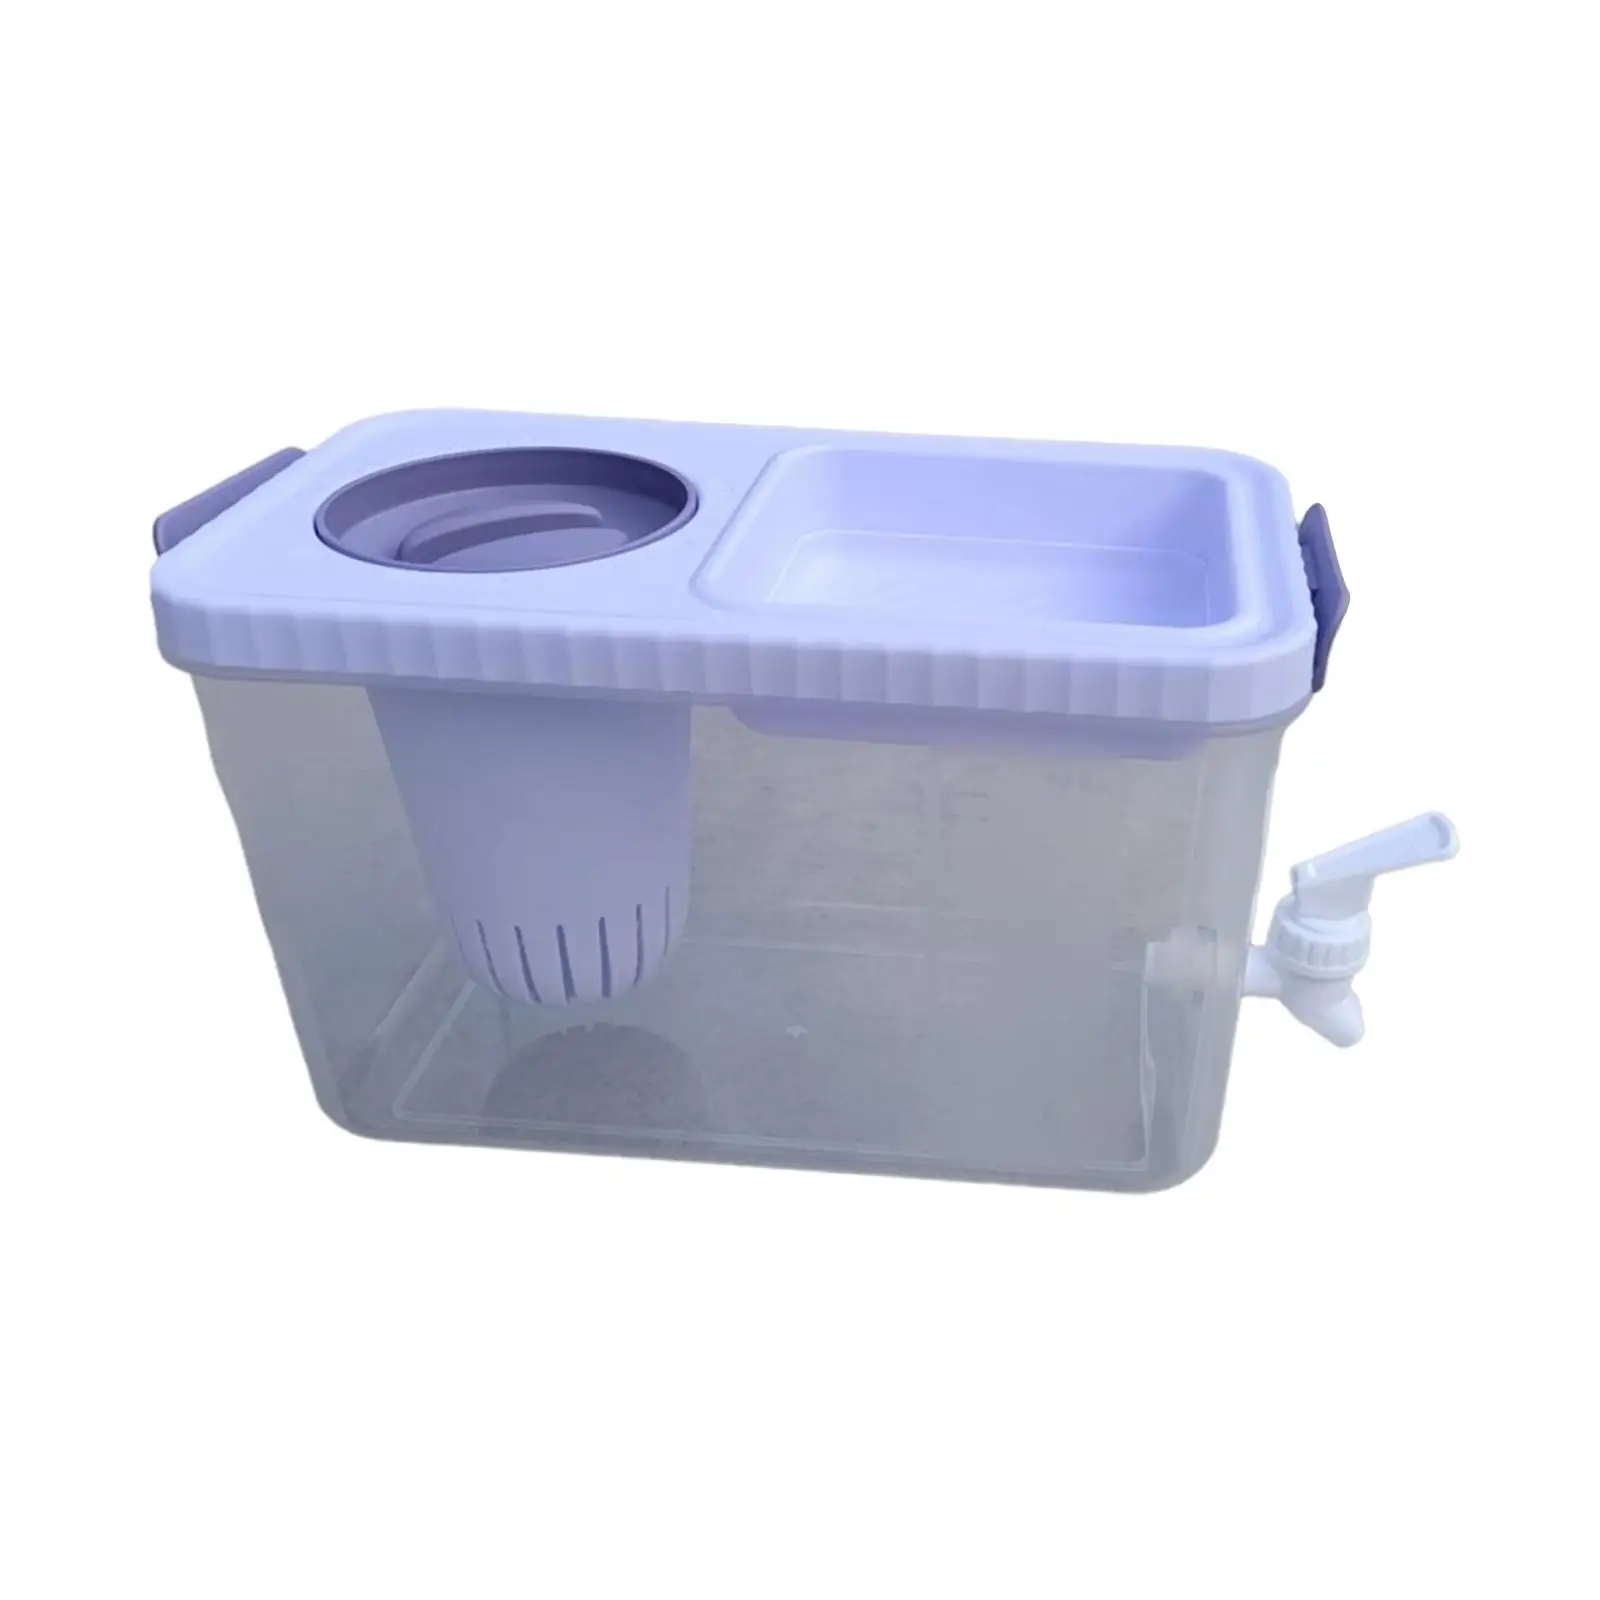 Refrigerator Cold Kettle Container with Spigot Portable Iced Beverage Dispenser for Outdoor Home Fridge Fridge kitchen